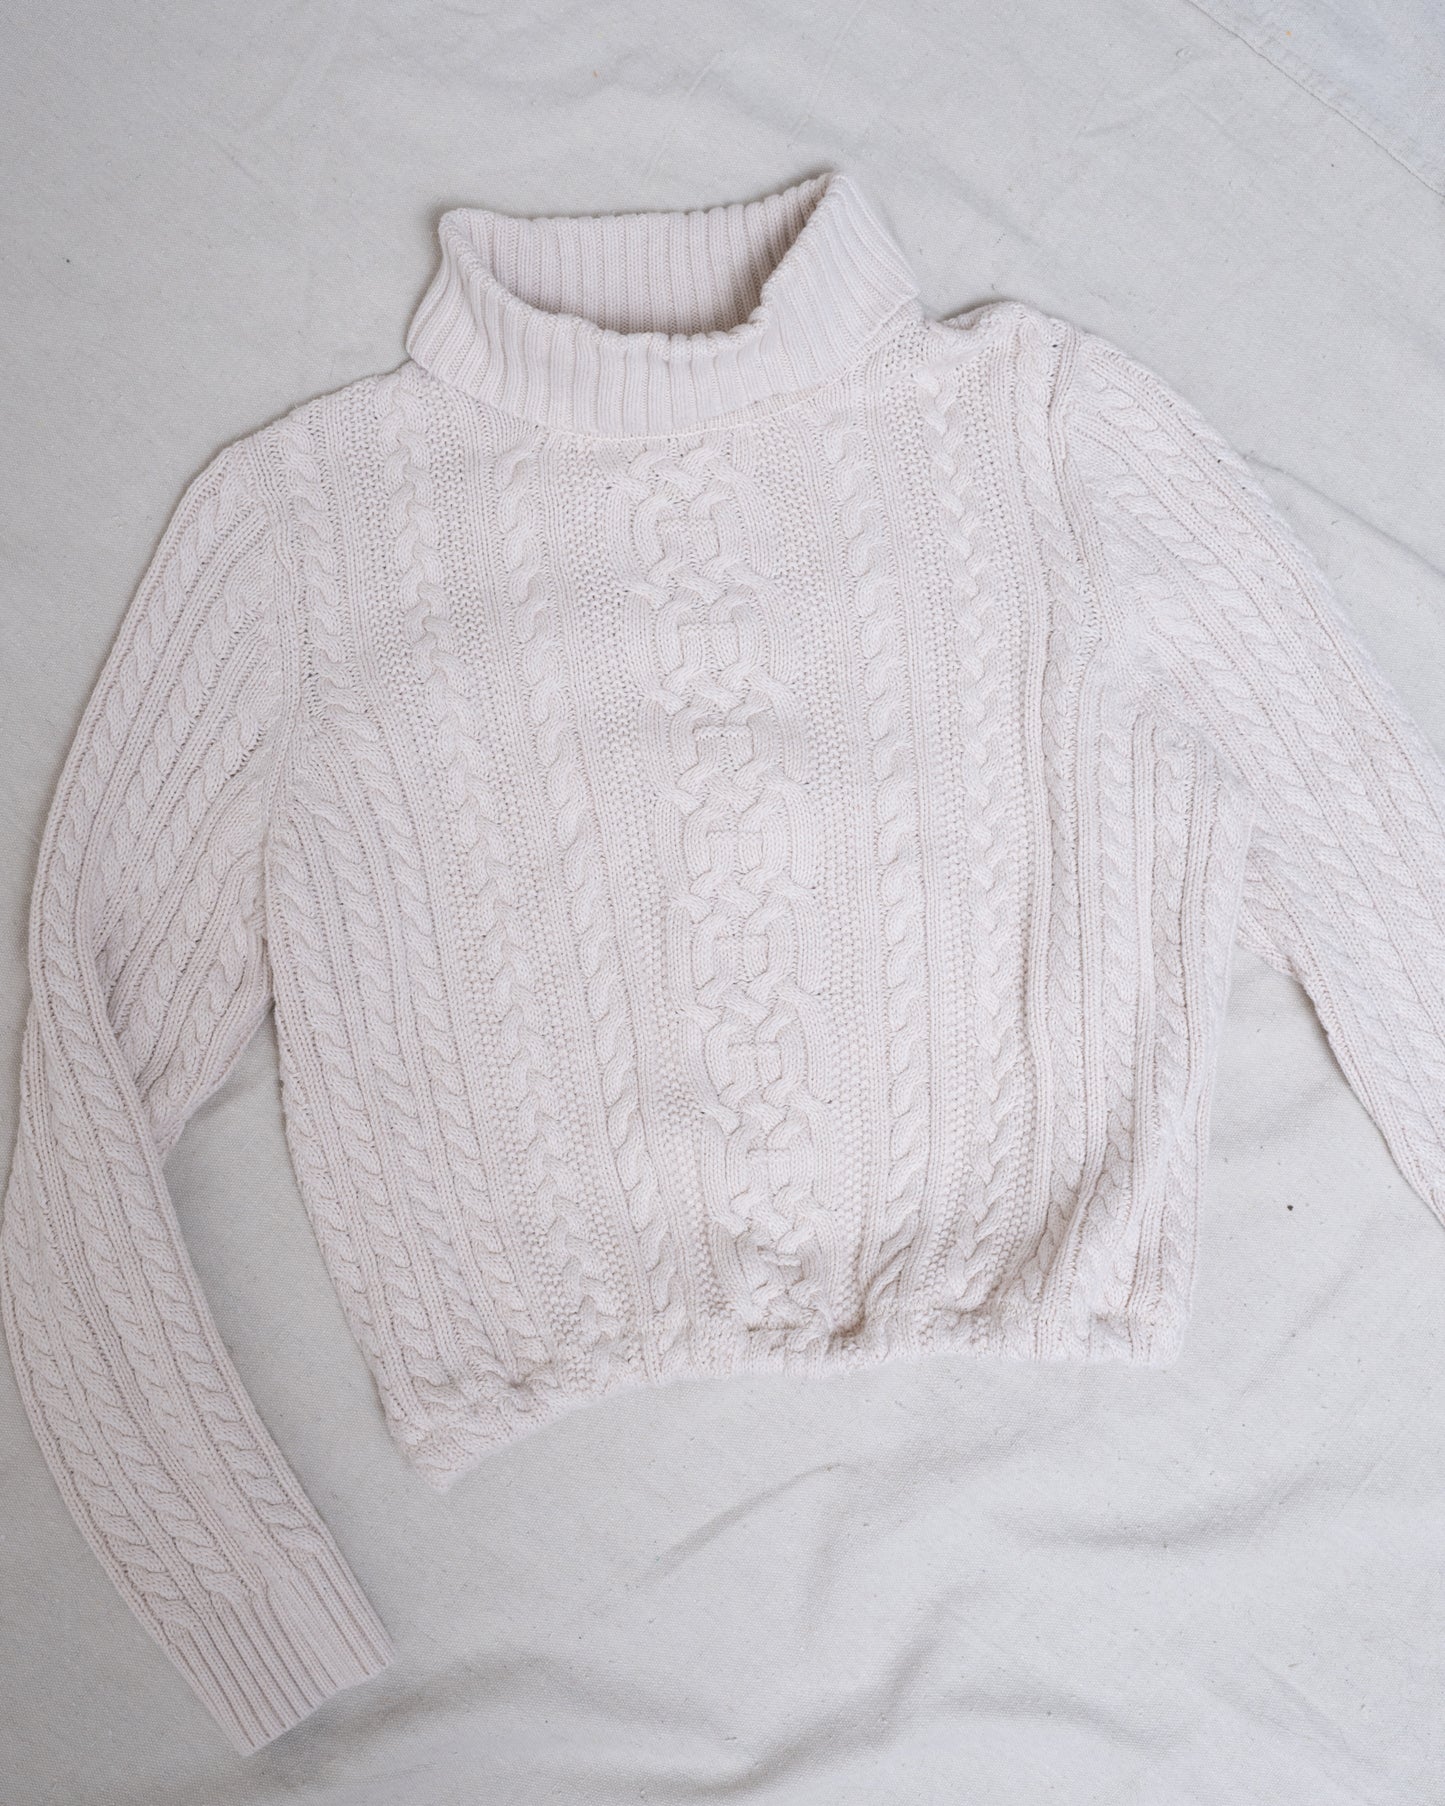 Vintage Cable Knit Reworked Sweater (XS/S)